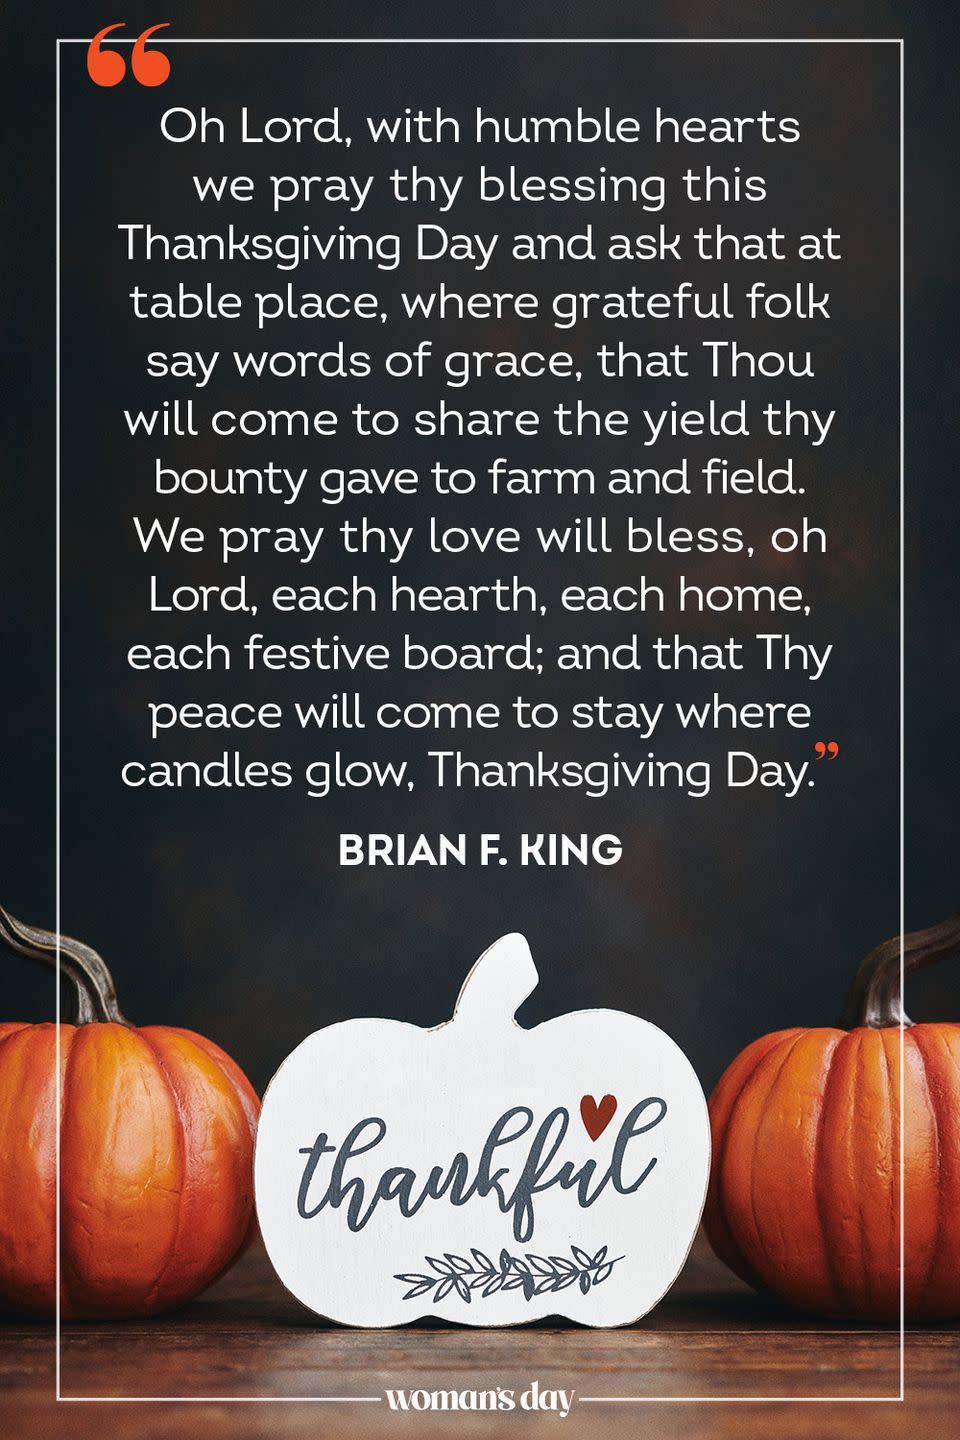 Thanksgiving Prayer for Peace and Prosperity